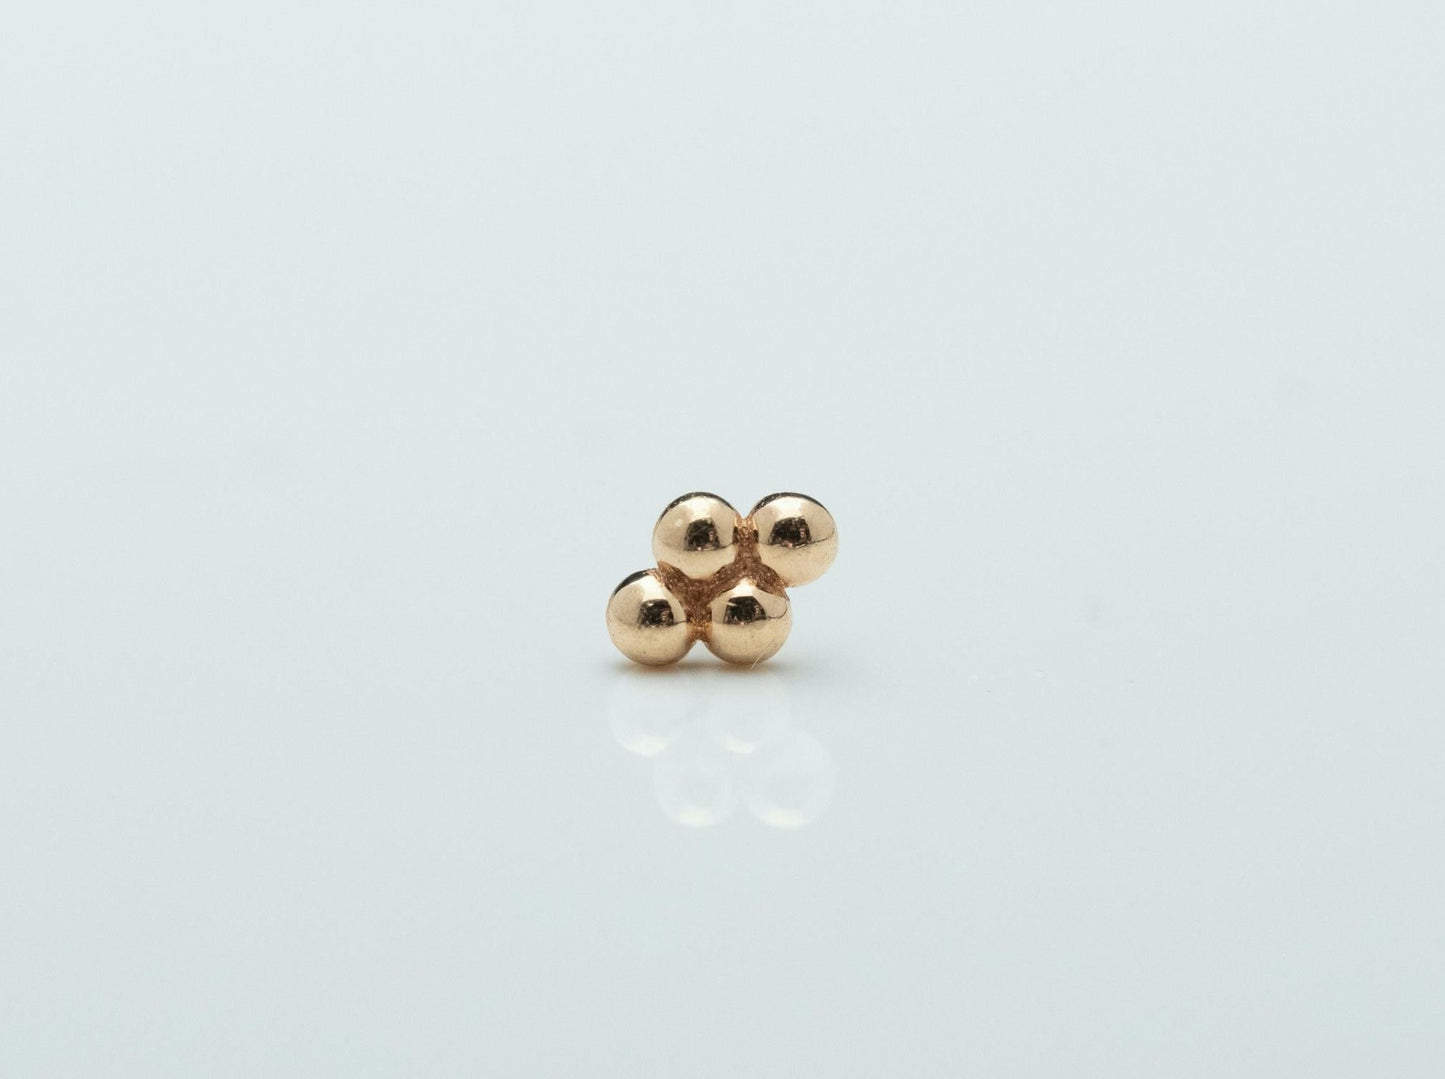 Quad Bead Cluster in 14k Rose Gold Threadless by BVLA